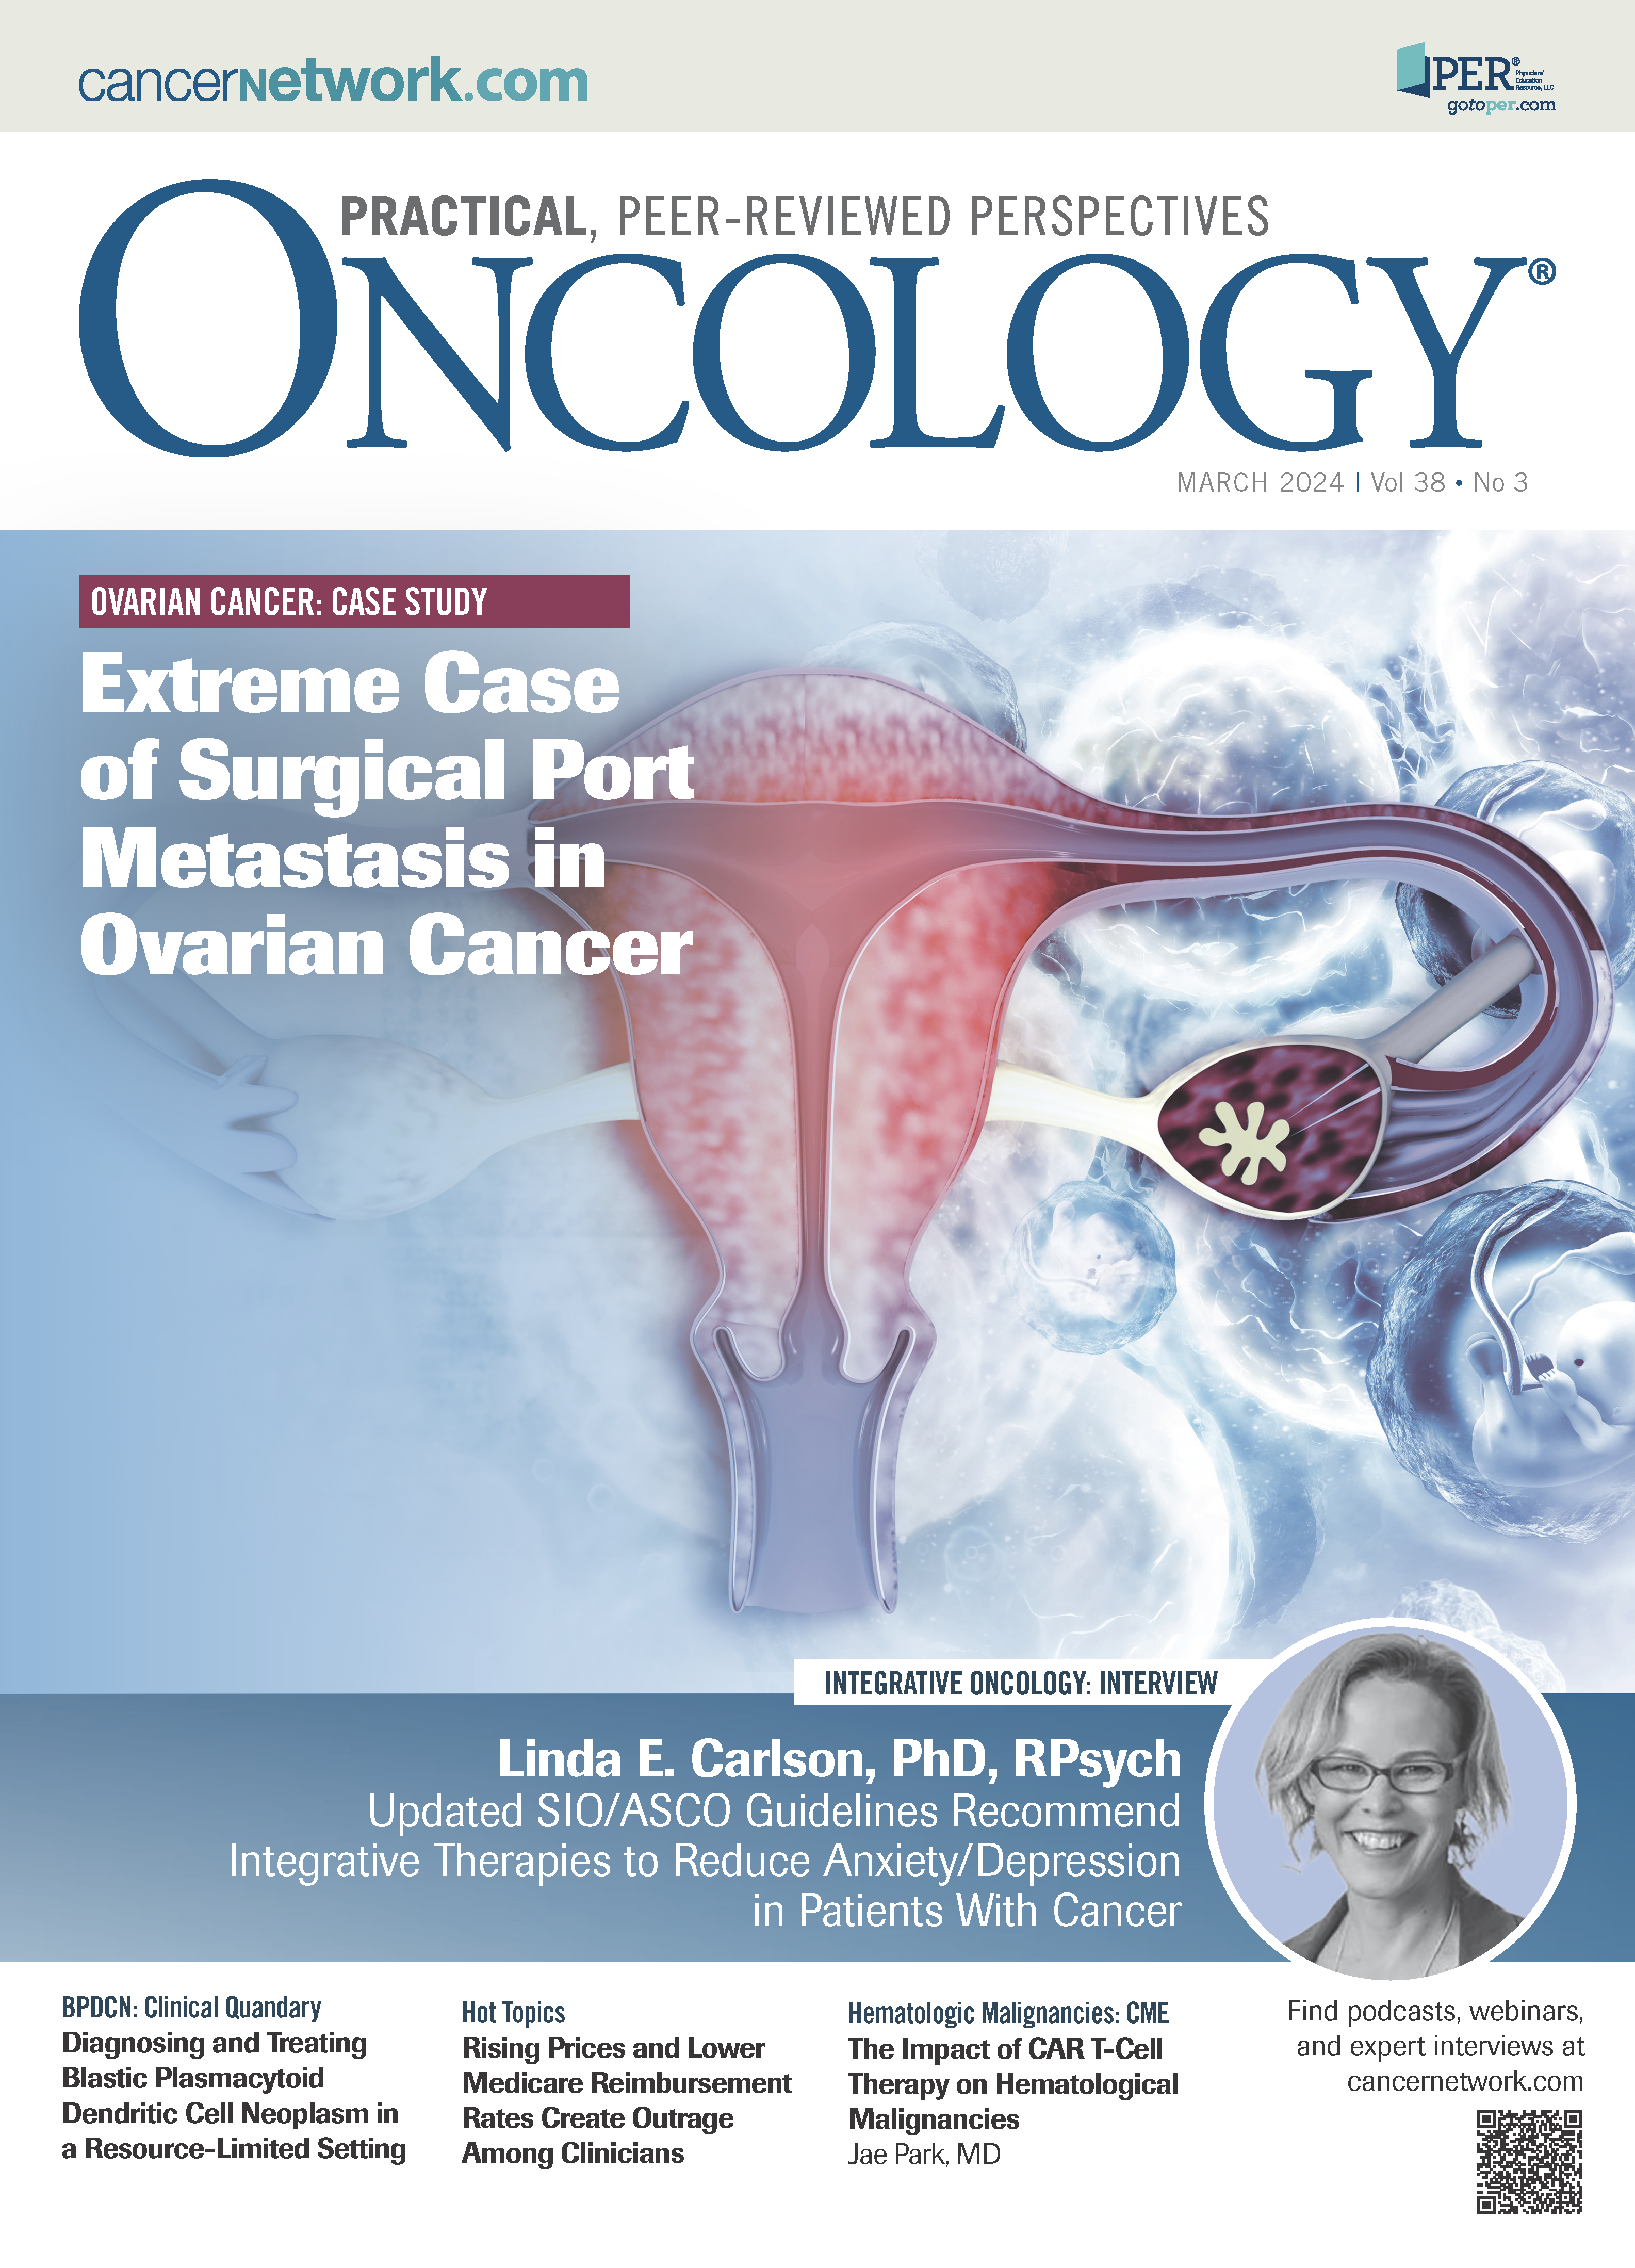 ONCOLOGY Vol 38, Issue 3